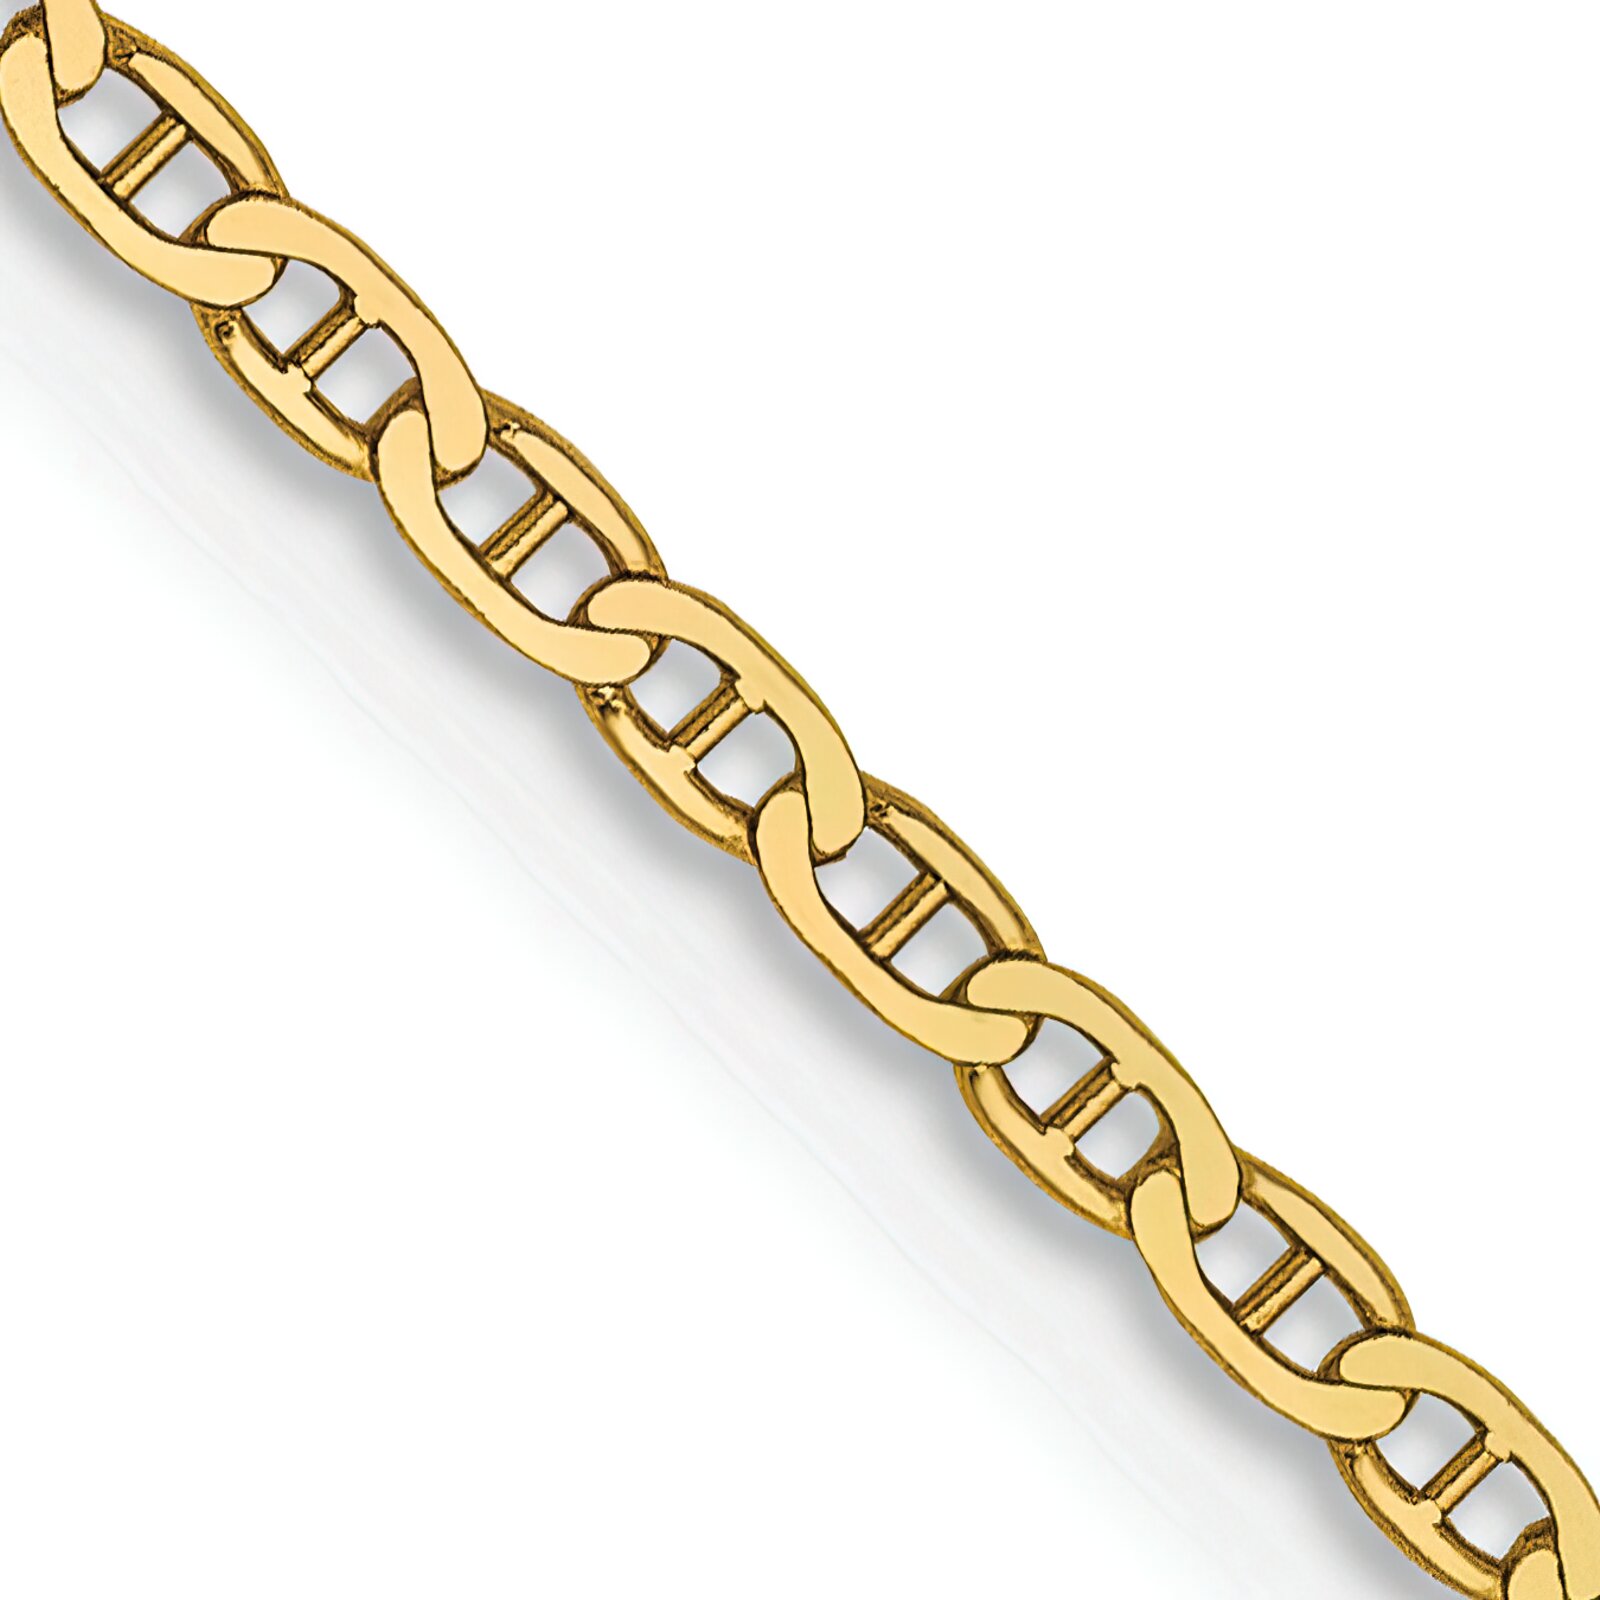 Findingking 14K Gold 1.5mm Anchor Link Chain Necklace Jewelry 20"